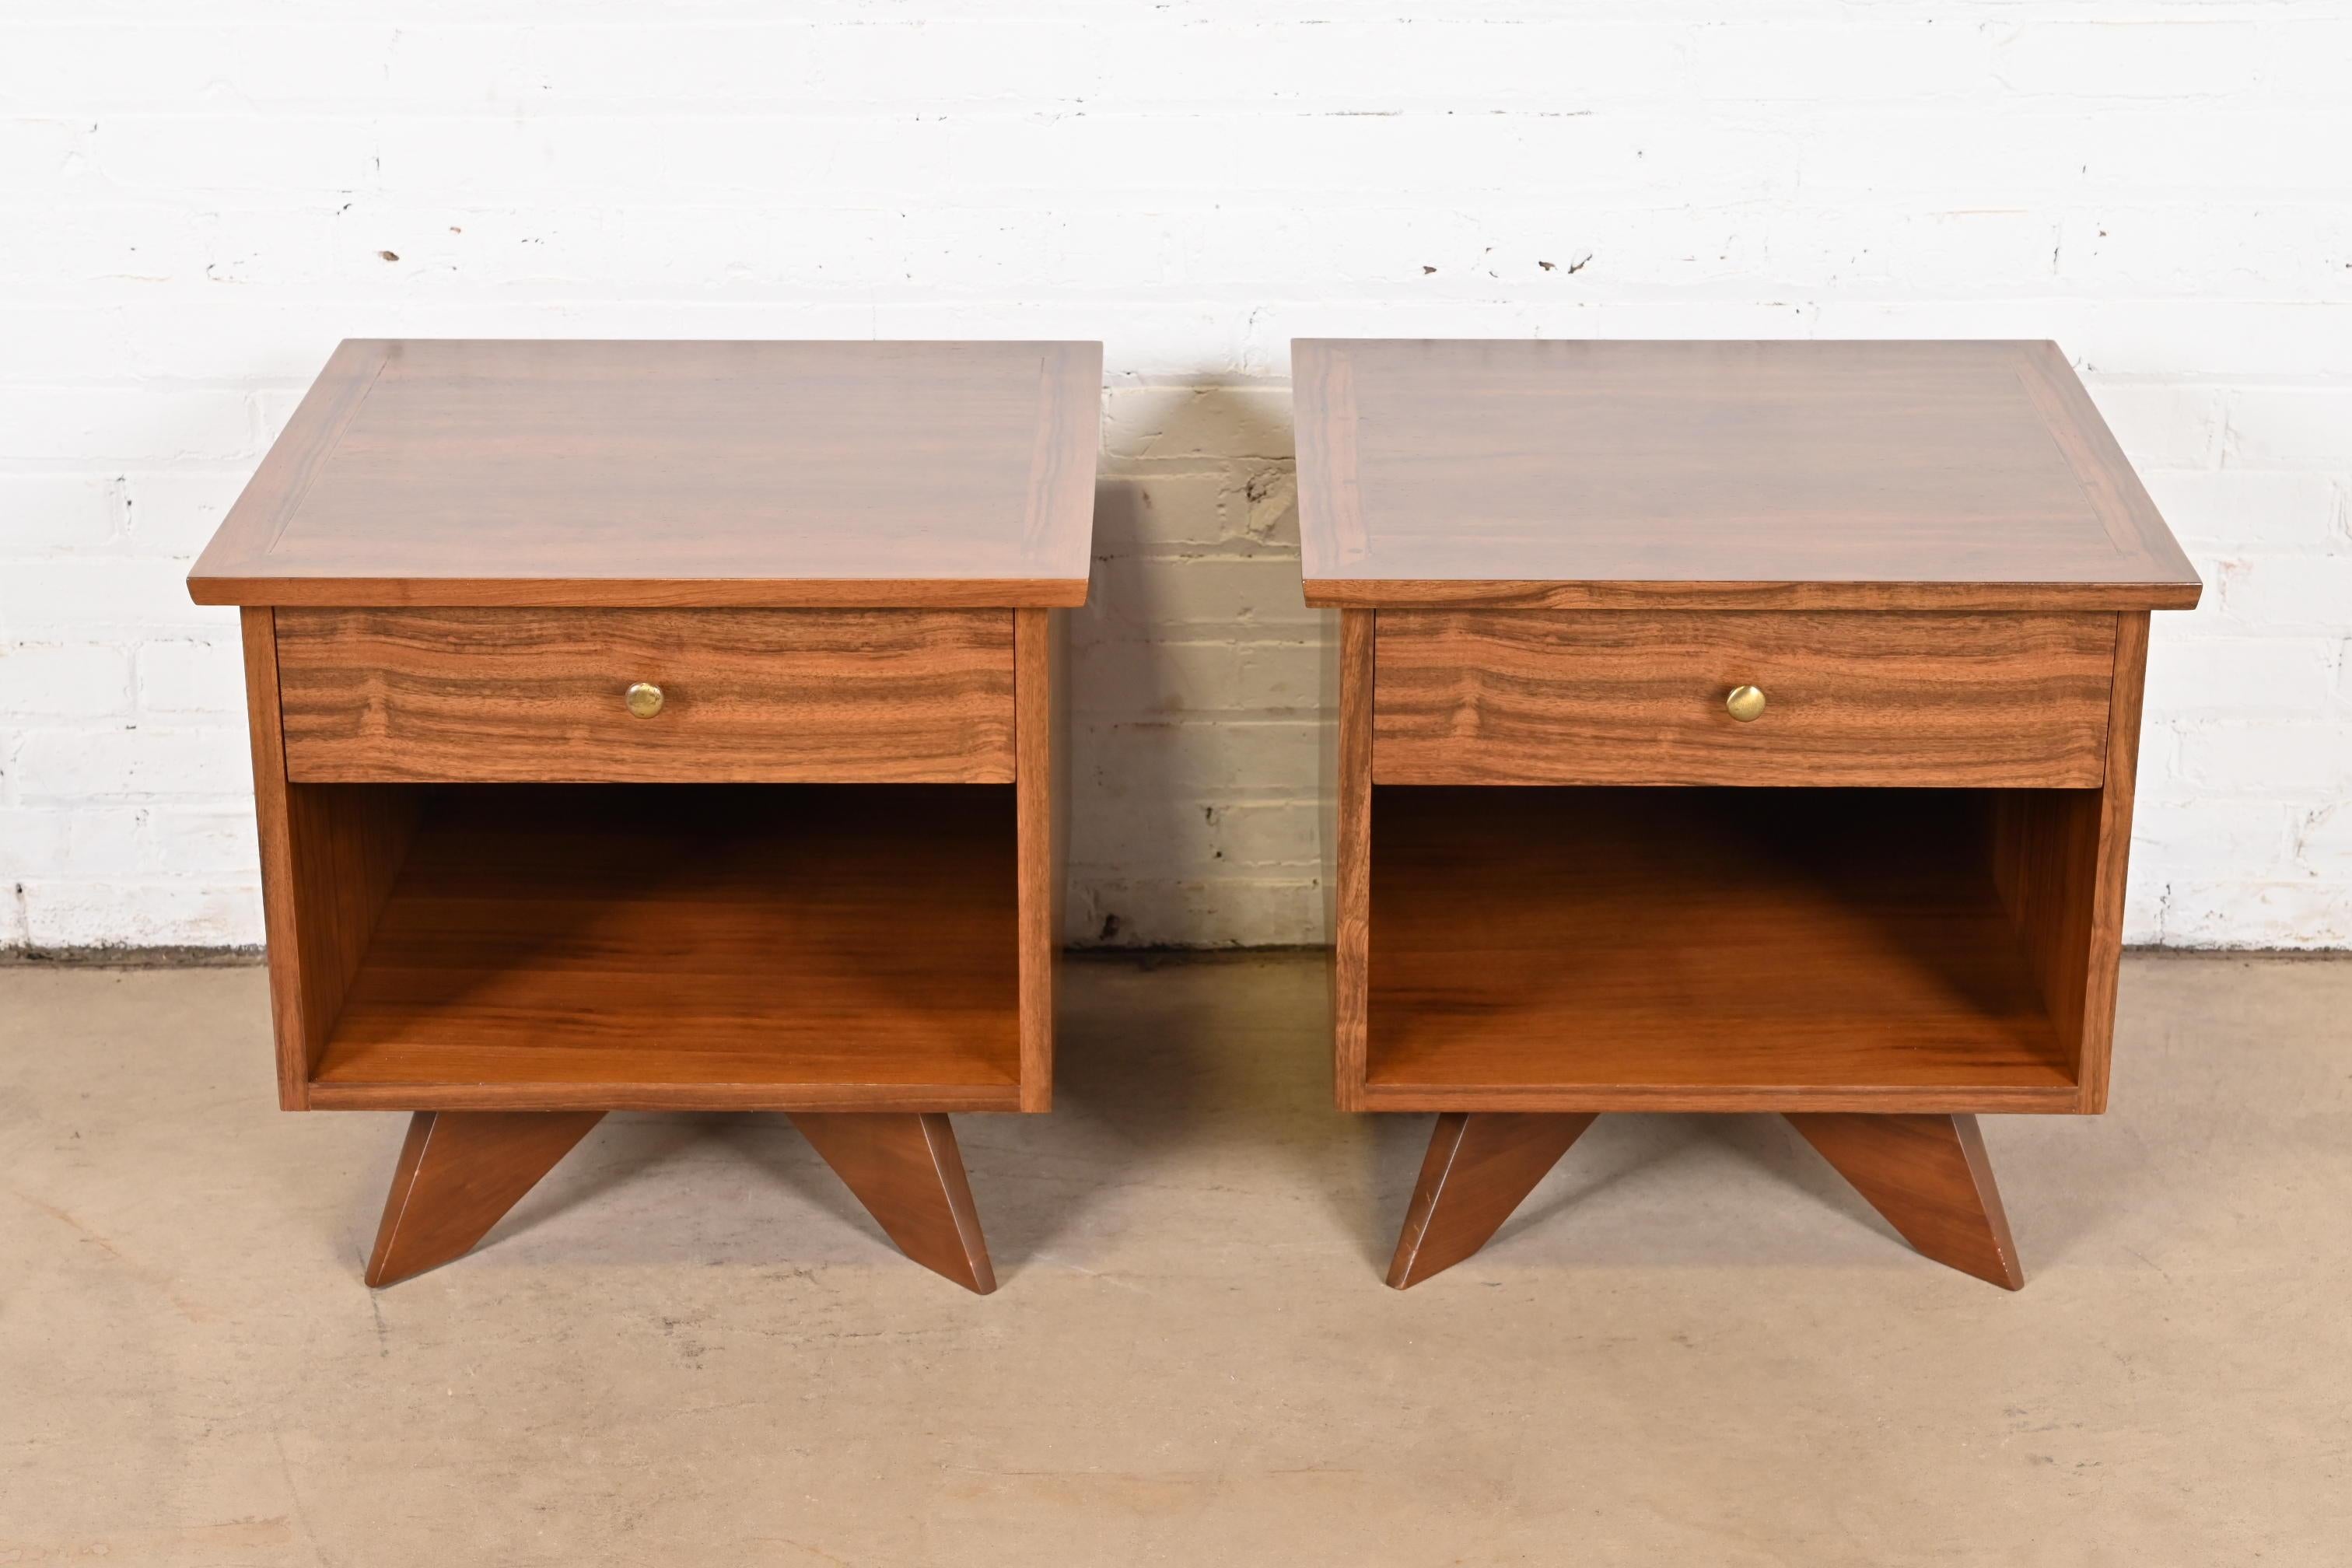 A very rare and exceptional pair of mid-century Organic Modern nightstands

By George Nakashima for Widdicomb Furniture, 